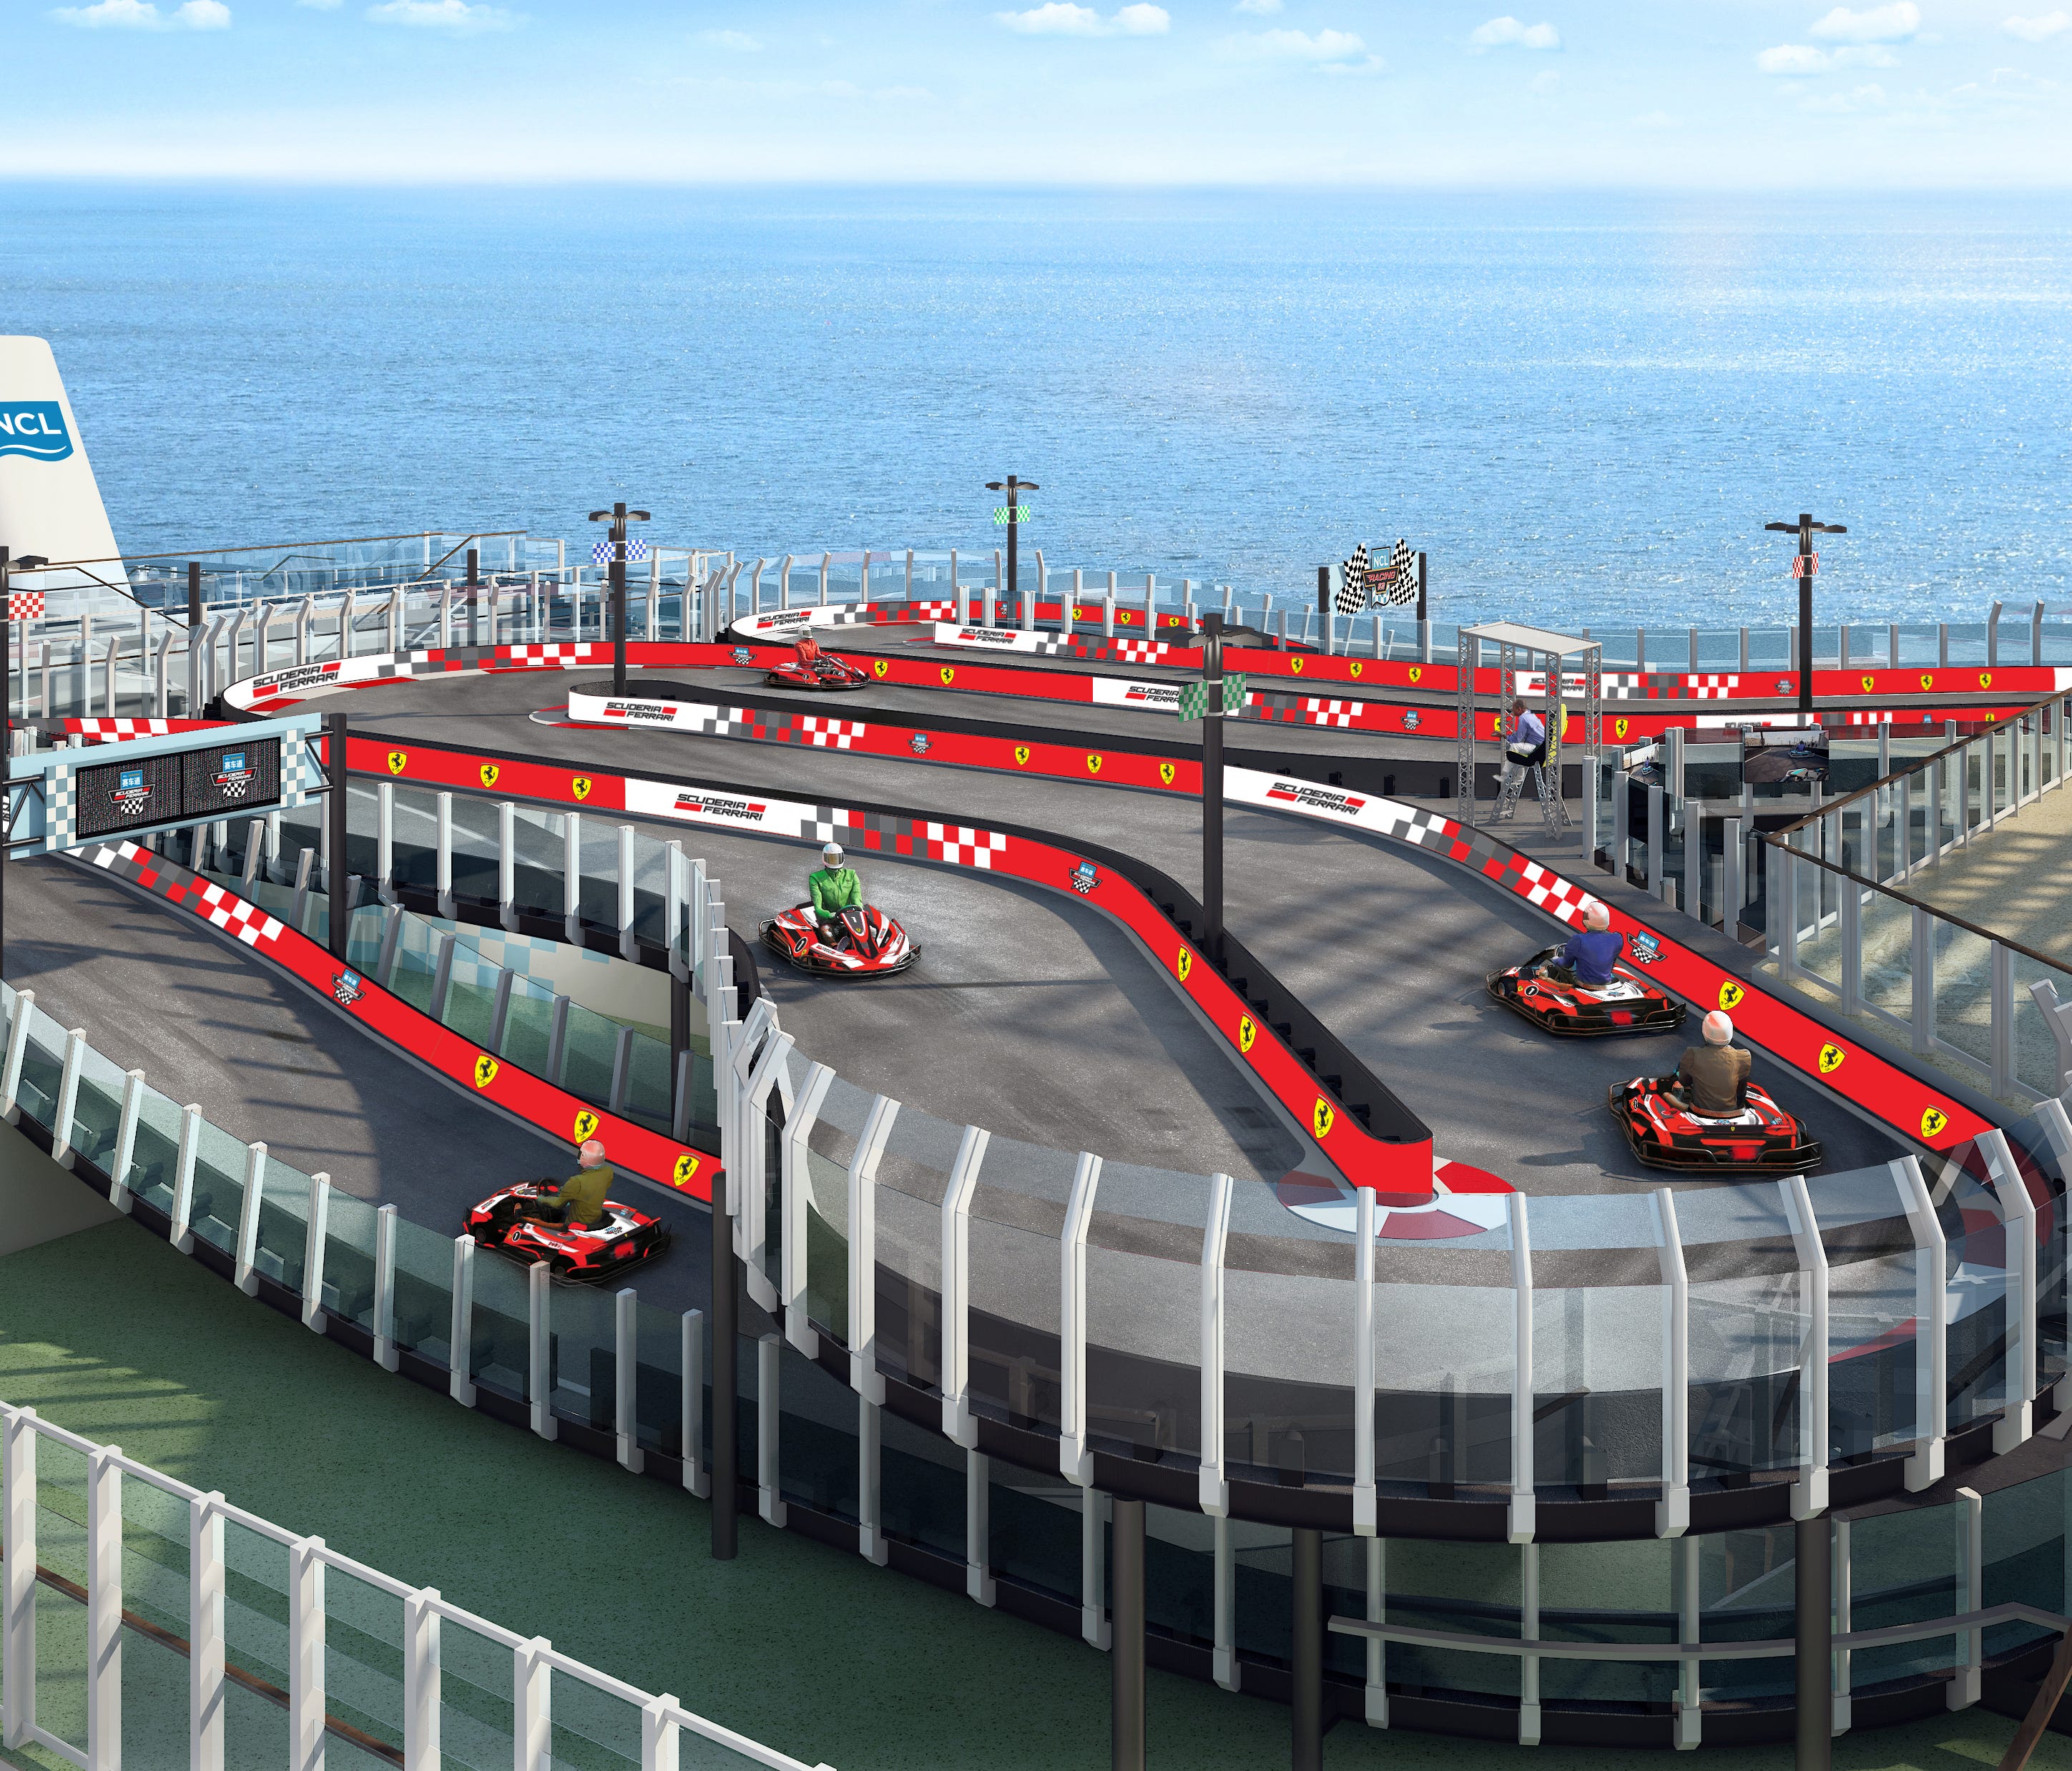 Norwegian Cruise Line's soon-to-debut Norwegian Joy will feature a Ferrari-themed race track on its top deck.